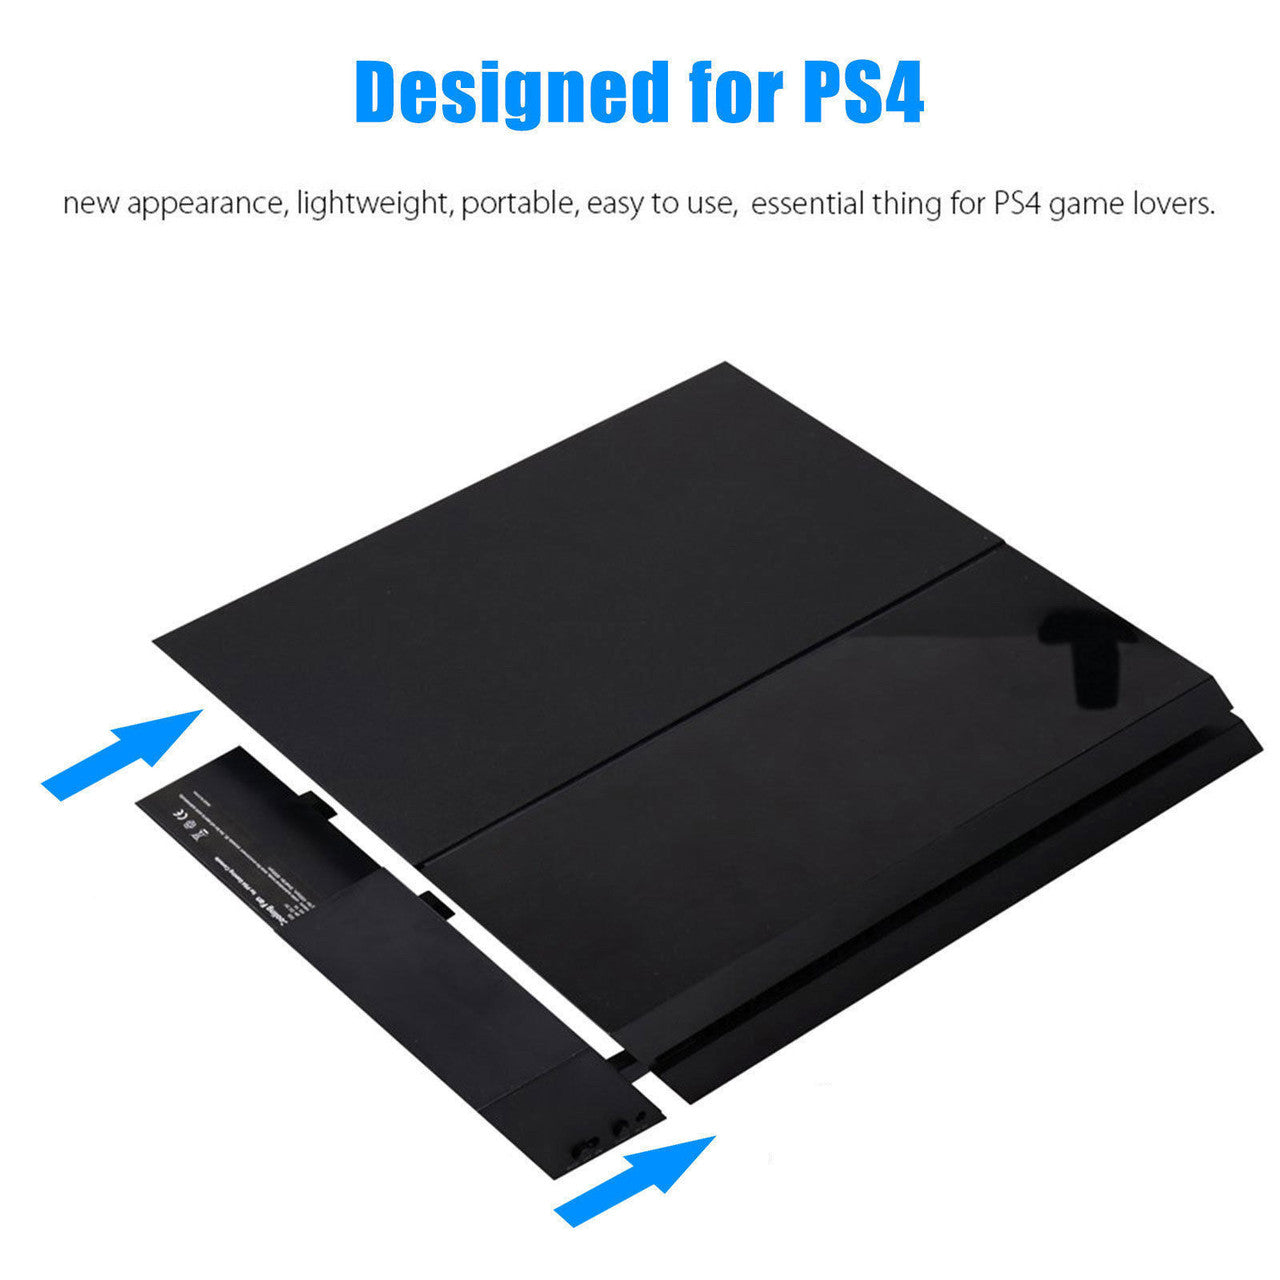 USB External Cooler with 5 Turbo Fan Temperature Control Cooling Fans for the Song Playstation 4 Console